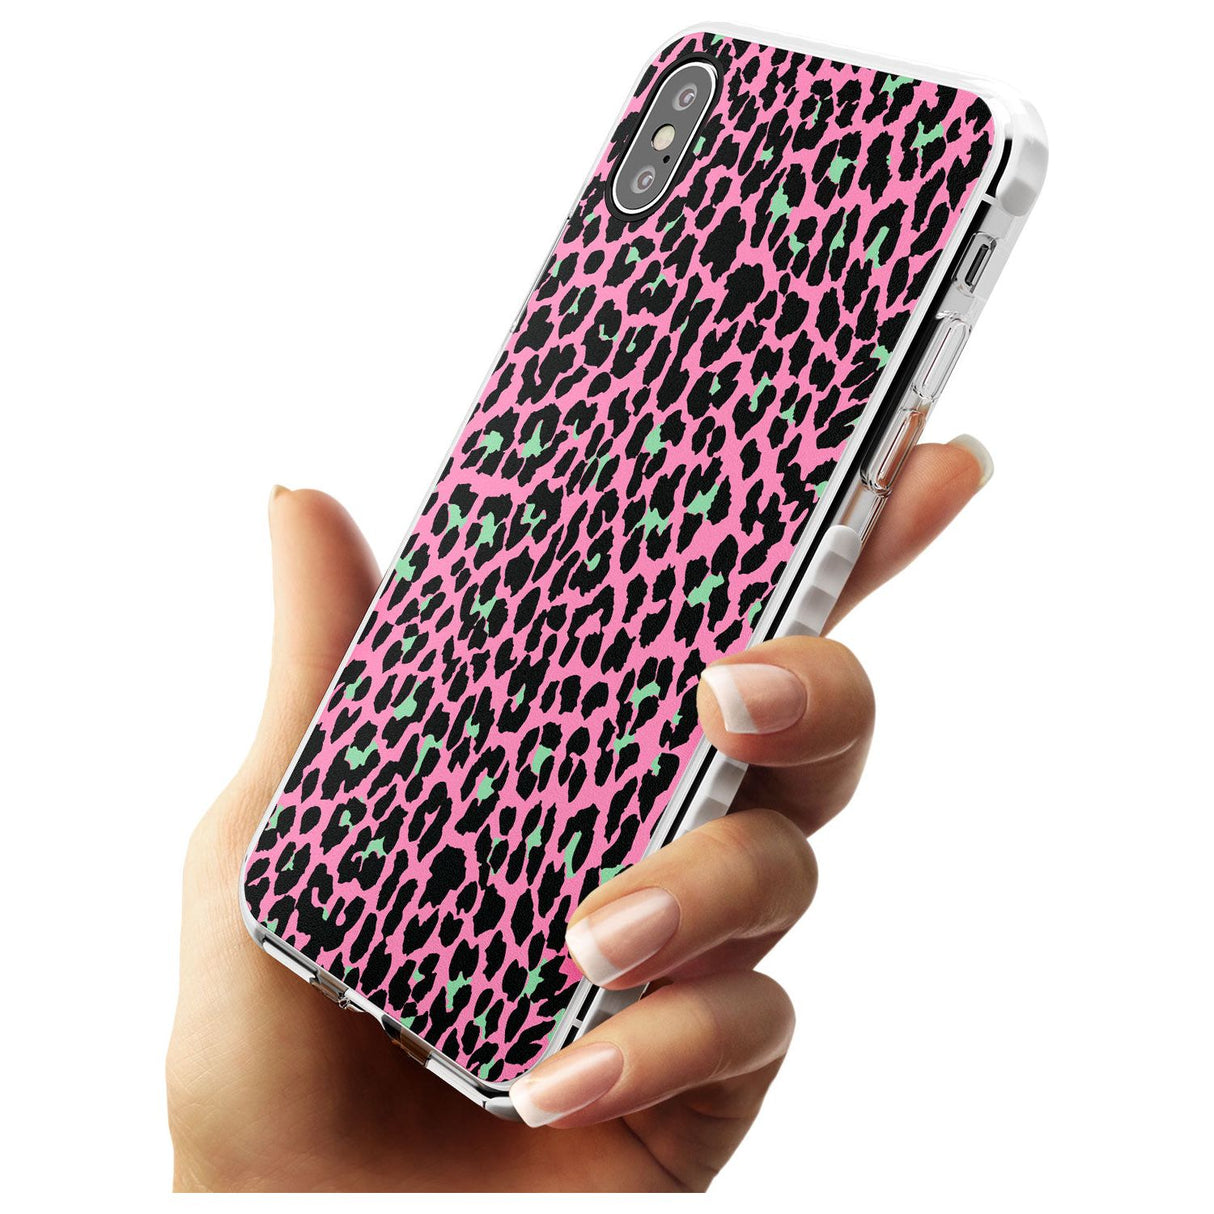 Green on Pink Leopard Print Pattern Impact Phone Case for iPhone X XS Max XR